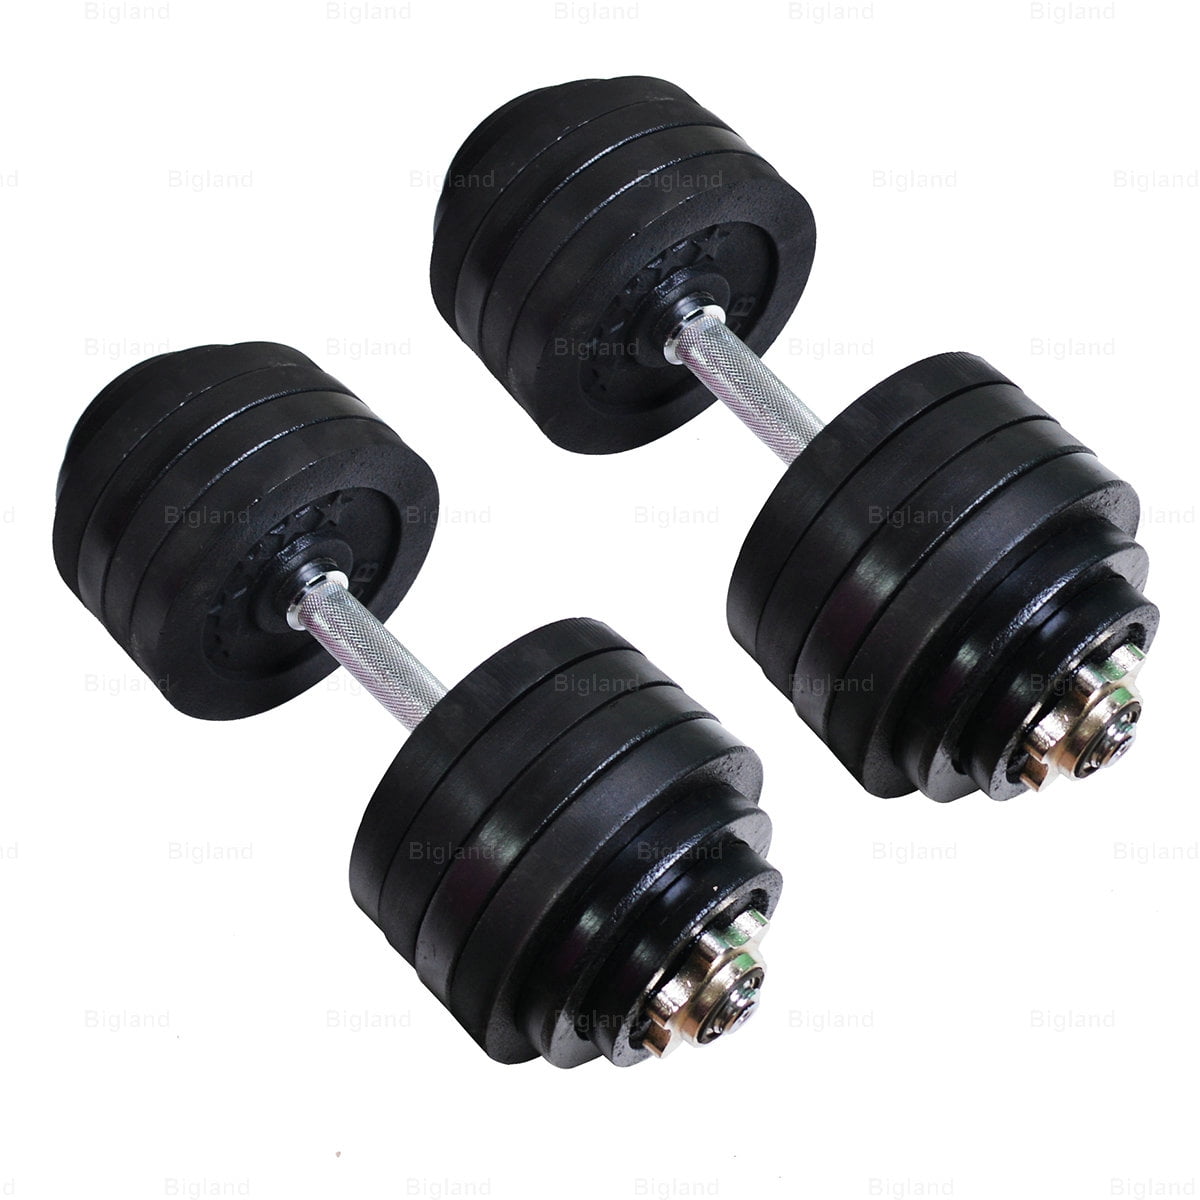 Details about   Totall 66 LB Weight Dumbbell Set Adjustable Cap Gym Barbell Plates Workout US 